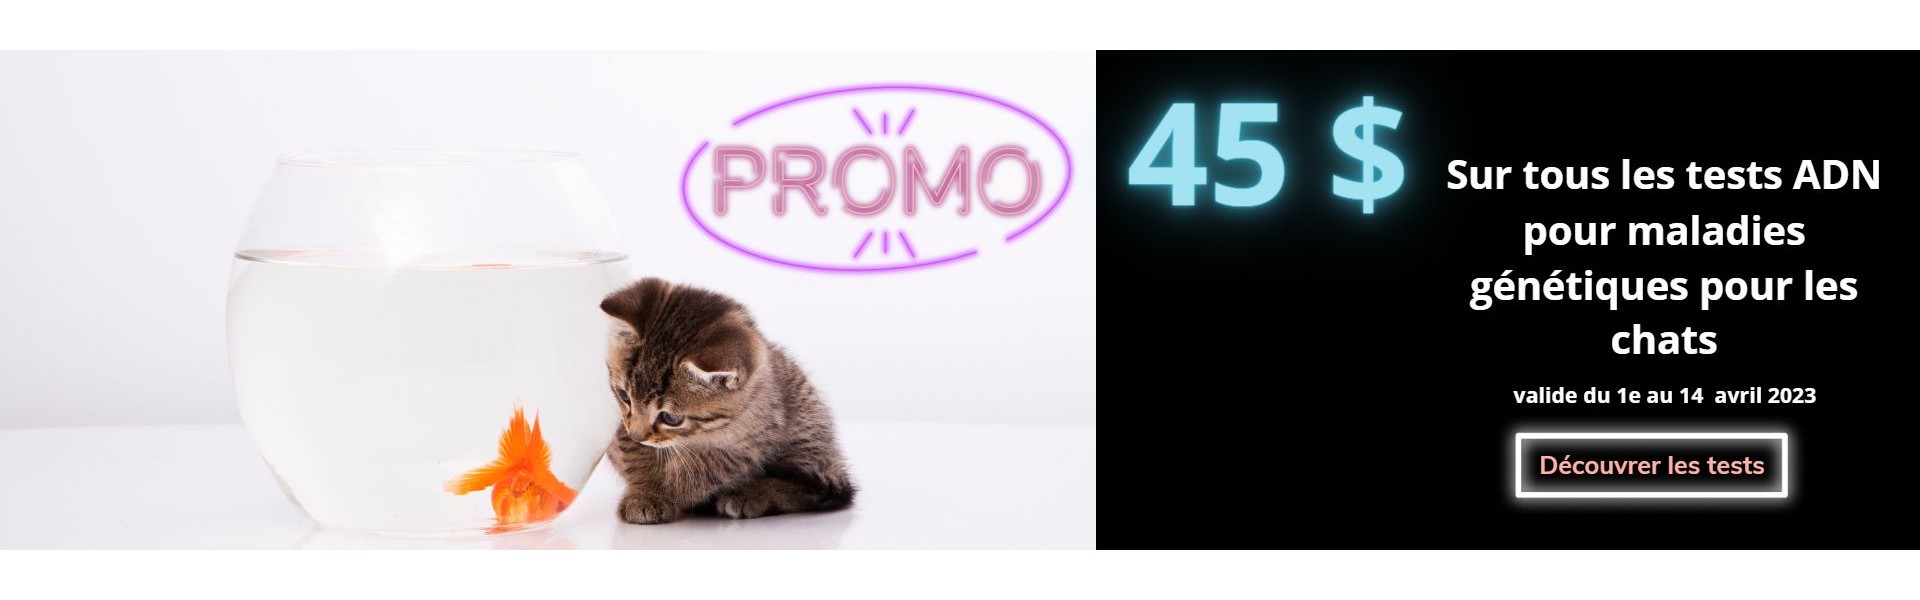 chat promotion avril